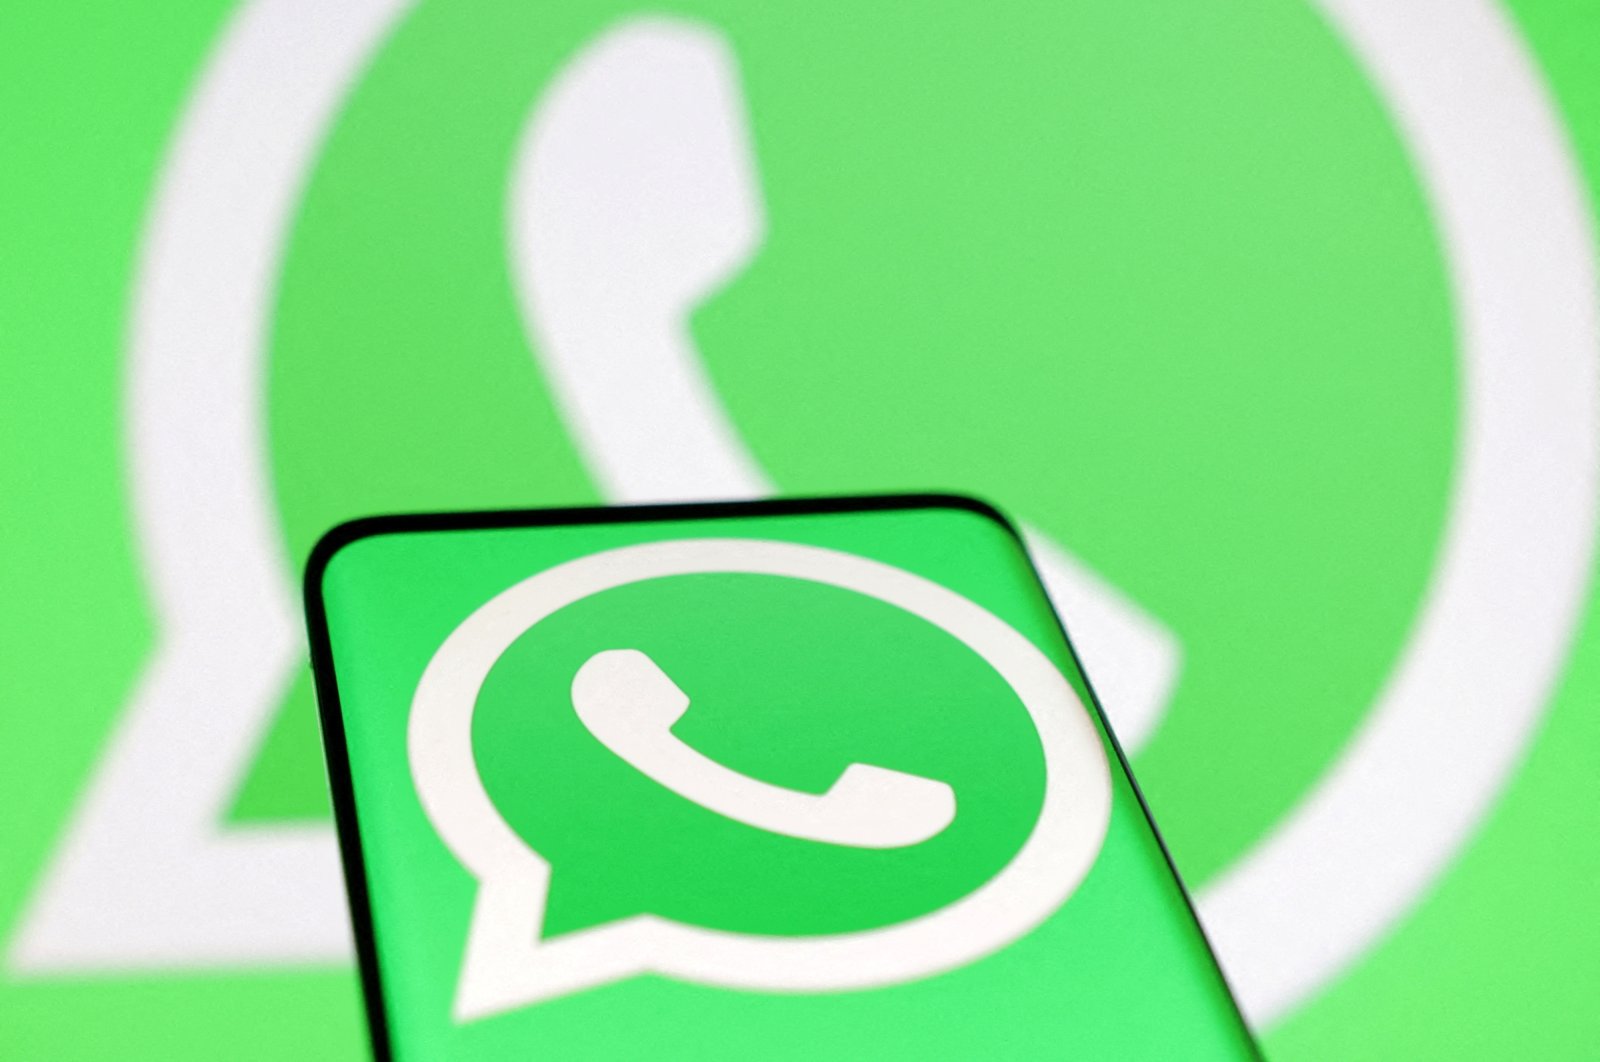 The Whatsapp logo is seen in this illustration created on Aug. 22, 2022. (Reuters Photo)